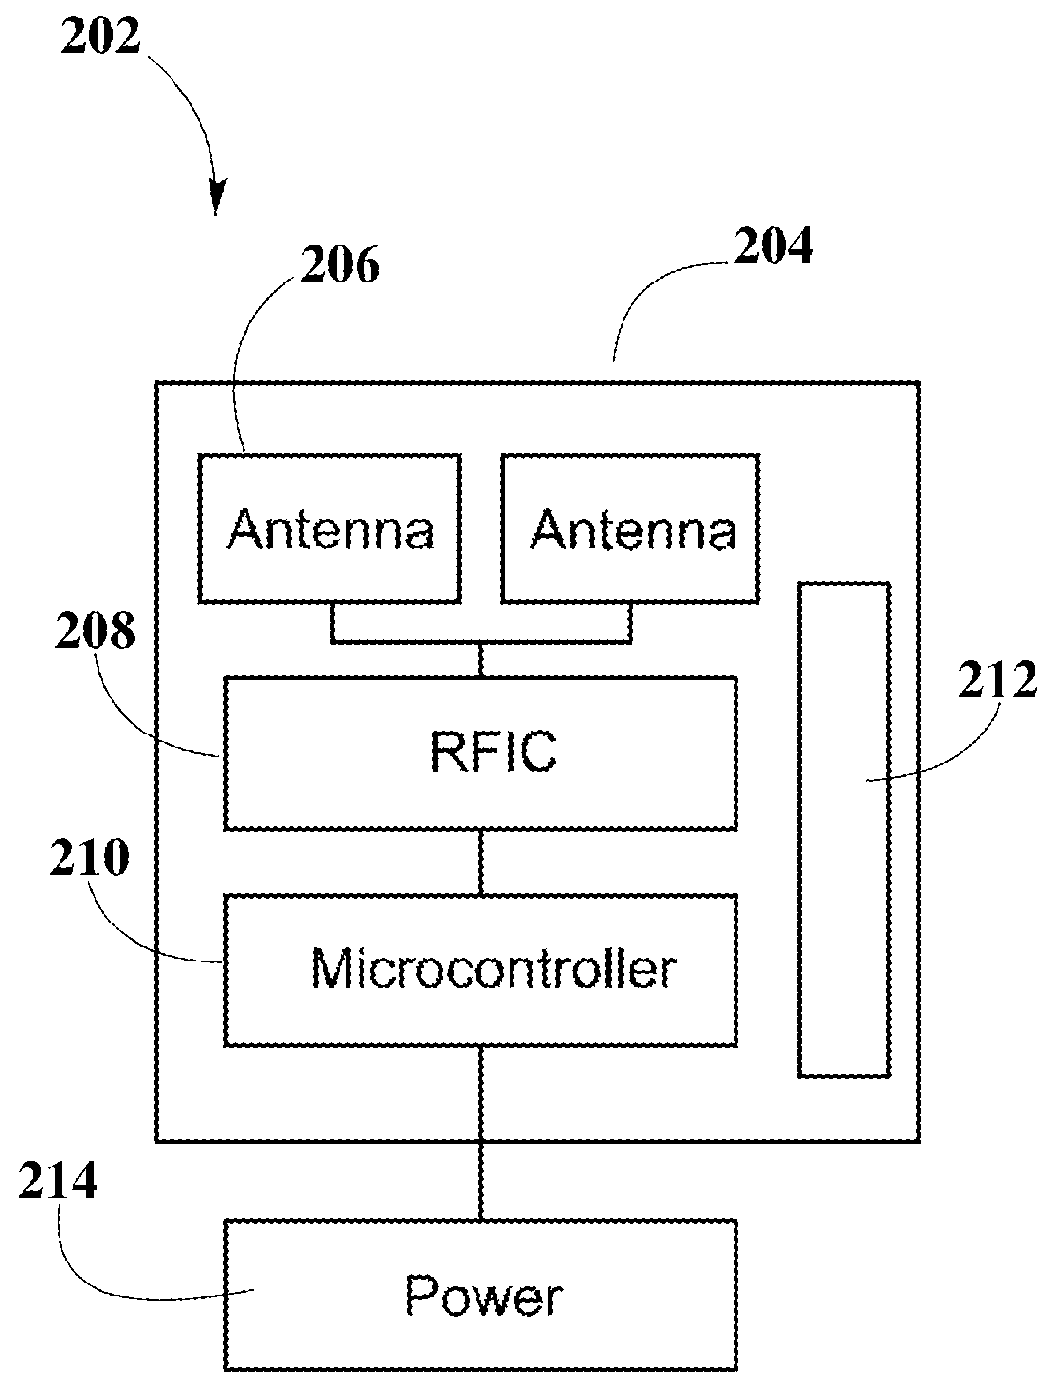 Method for Automatically Testing the Operational Status of a Wireless Power Receiver in a Wireless Power Transmission System